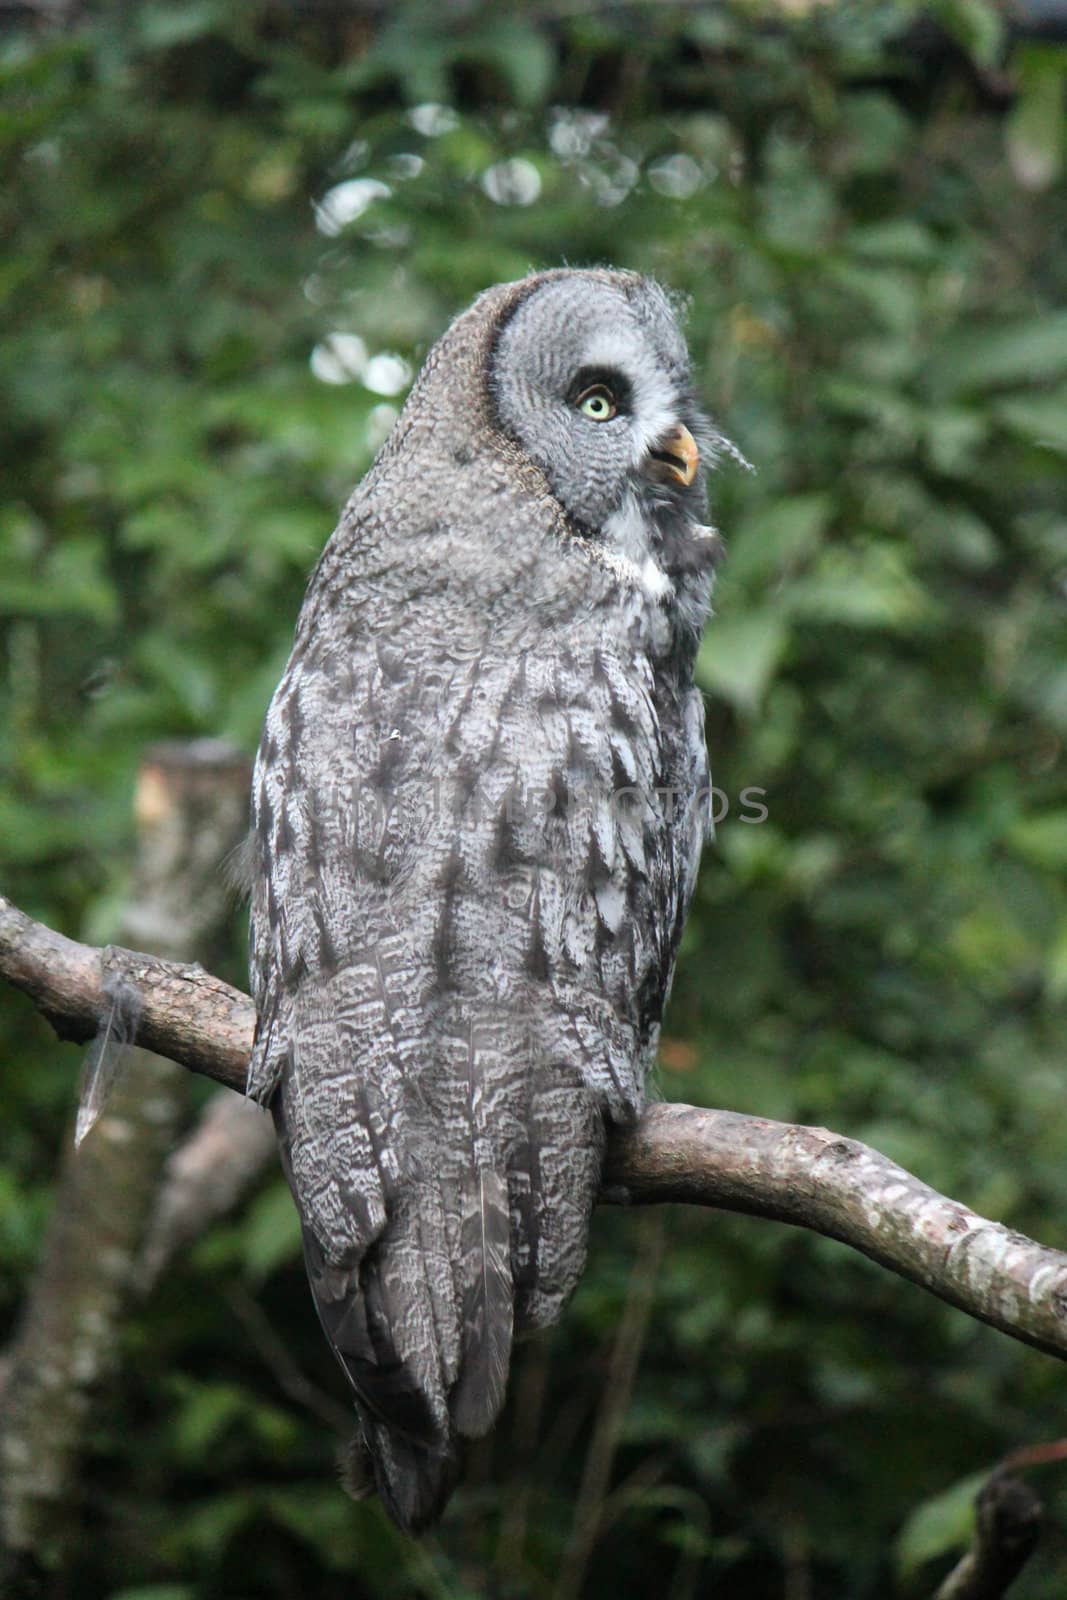 Grey violet lap owl standing on a branch and turning its head a little to look behind it